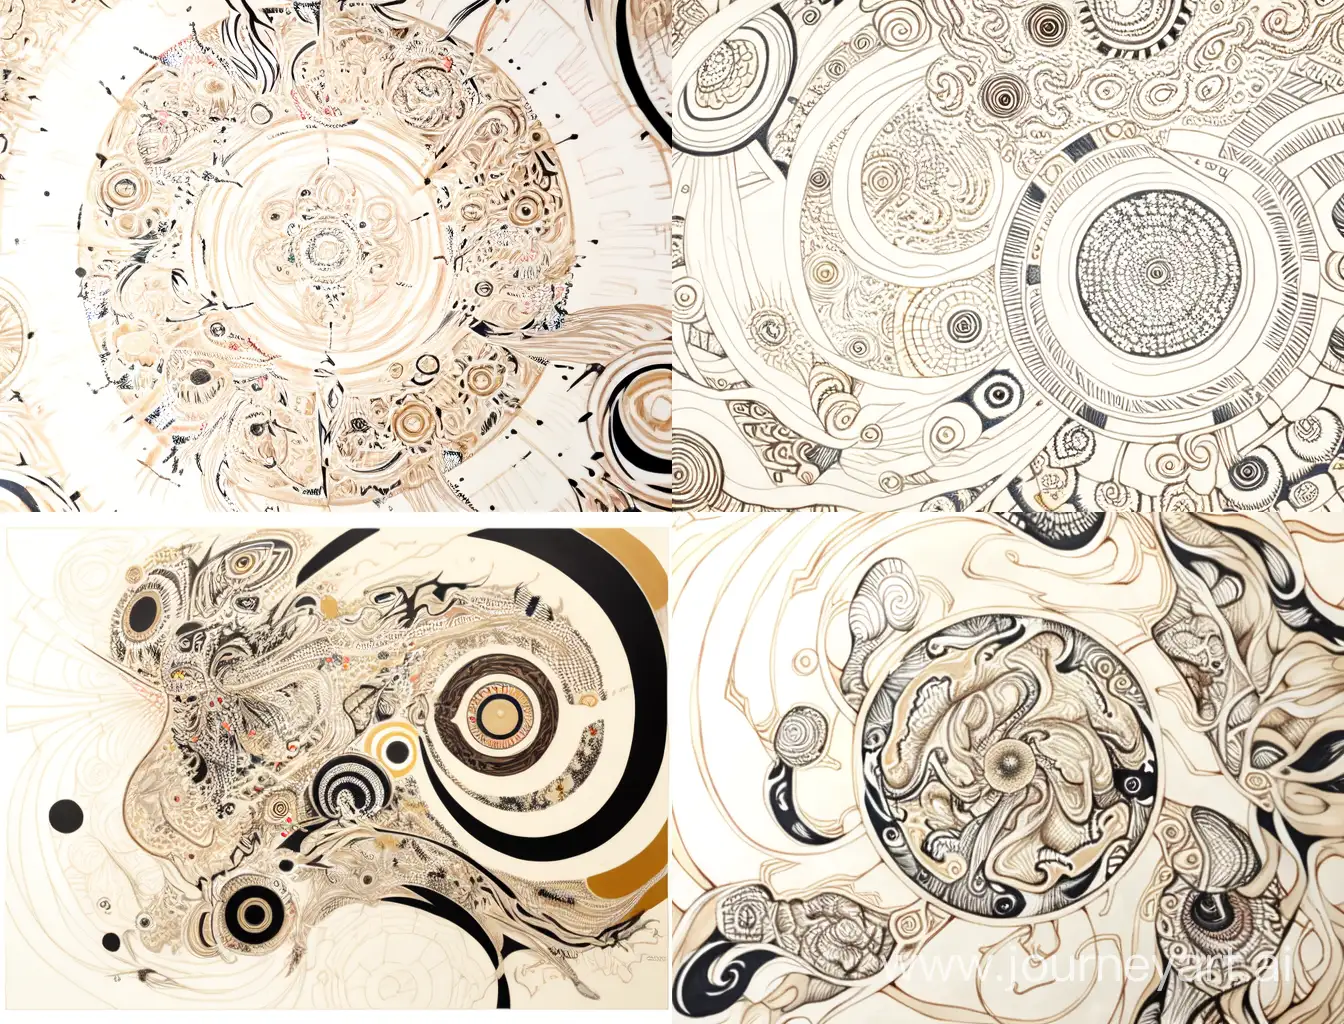 Meticulous-Ink-Drawing-Abstract-Ornaments-on-White-and-Beige-Background